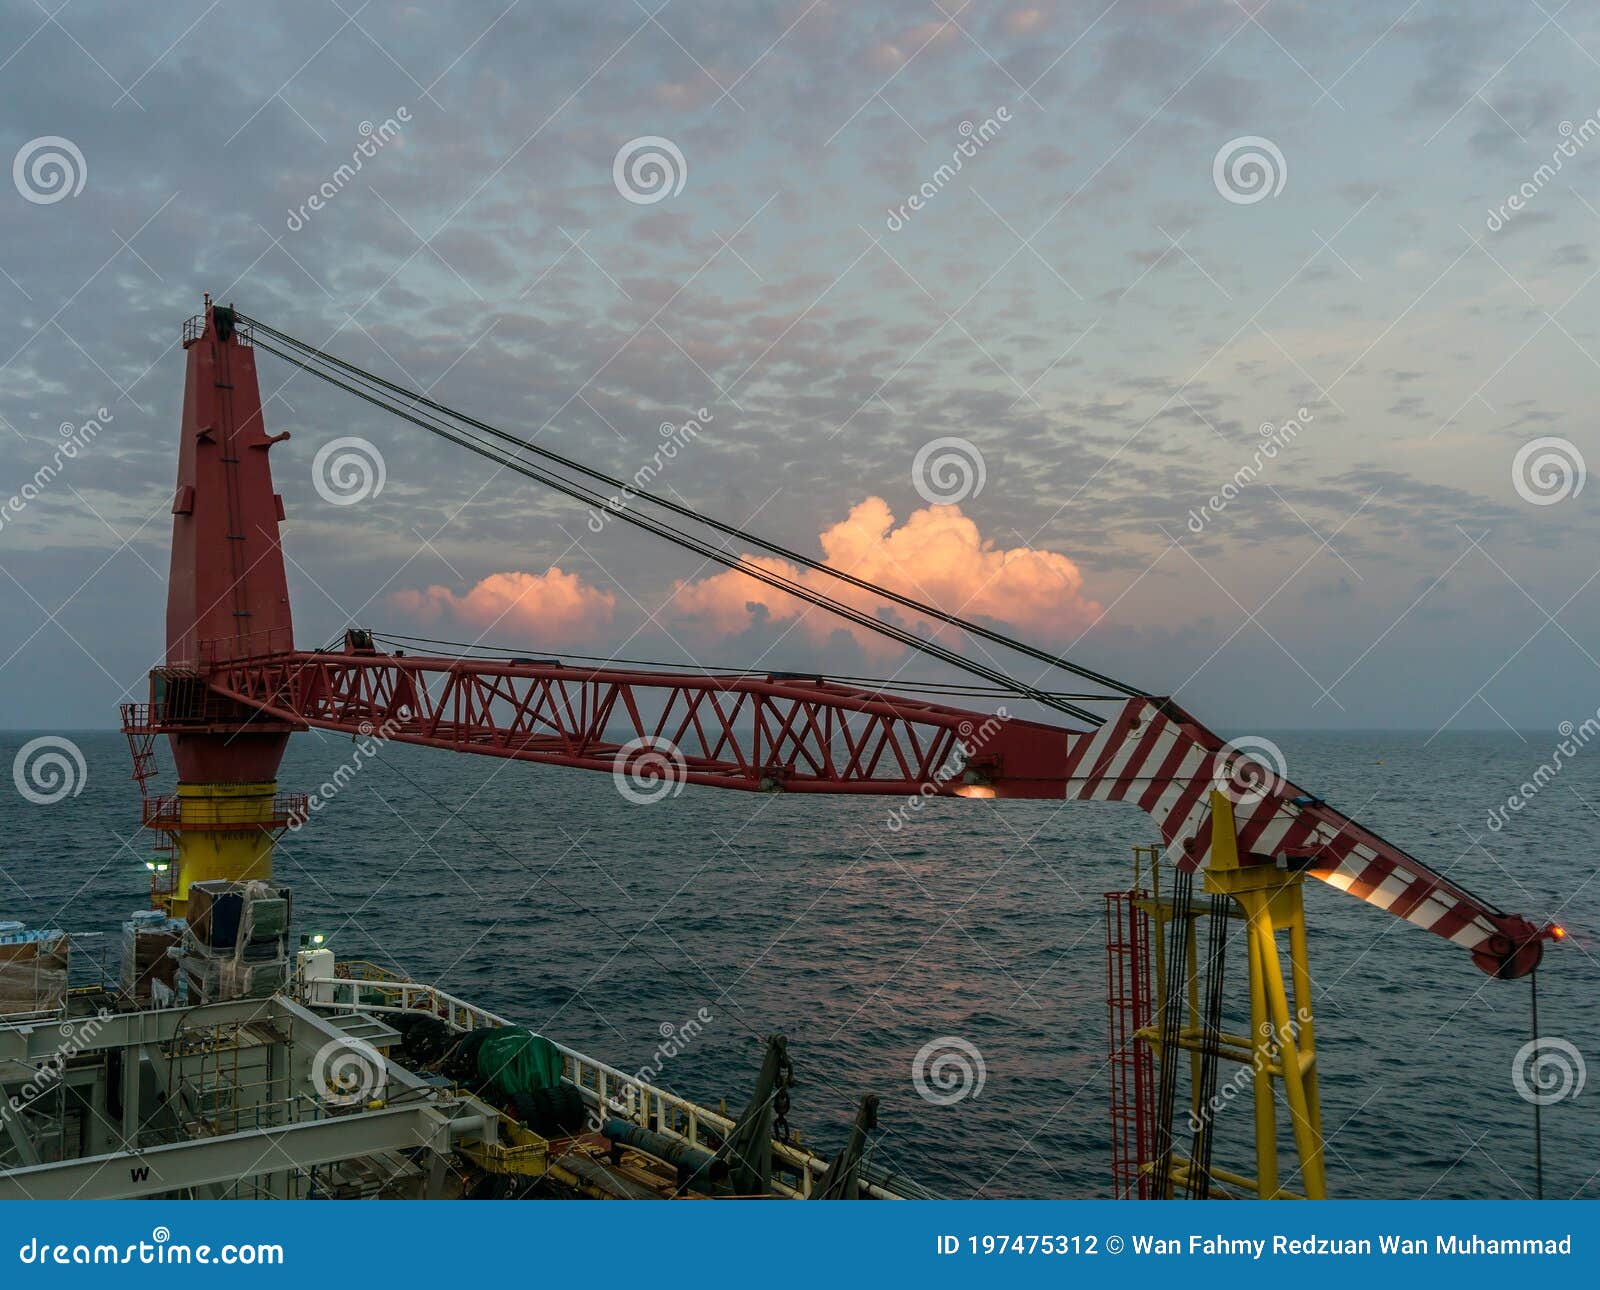 A typical accommodation construction work barge at oil field. A morning scenery of an offshore crane rested on boom rest onboard a typical accommodation construction work barge anchored at offshore Terengganu oil field while performing a hook-up and commissioning project